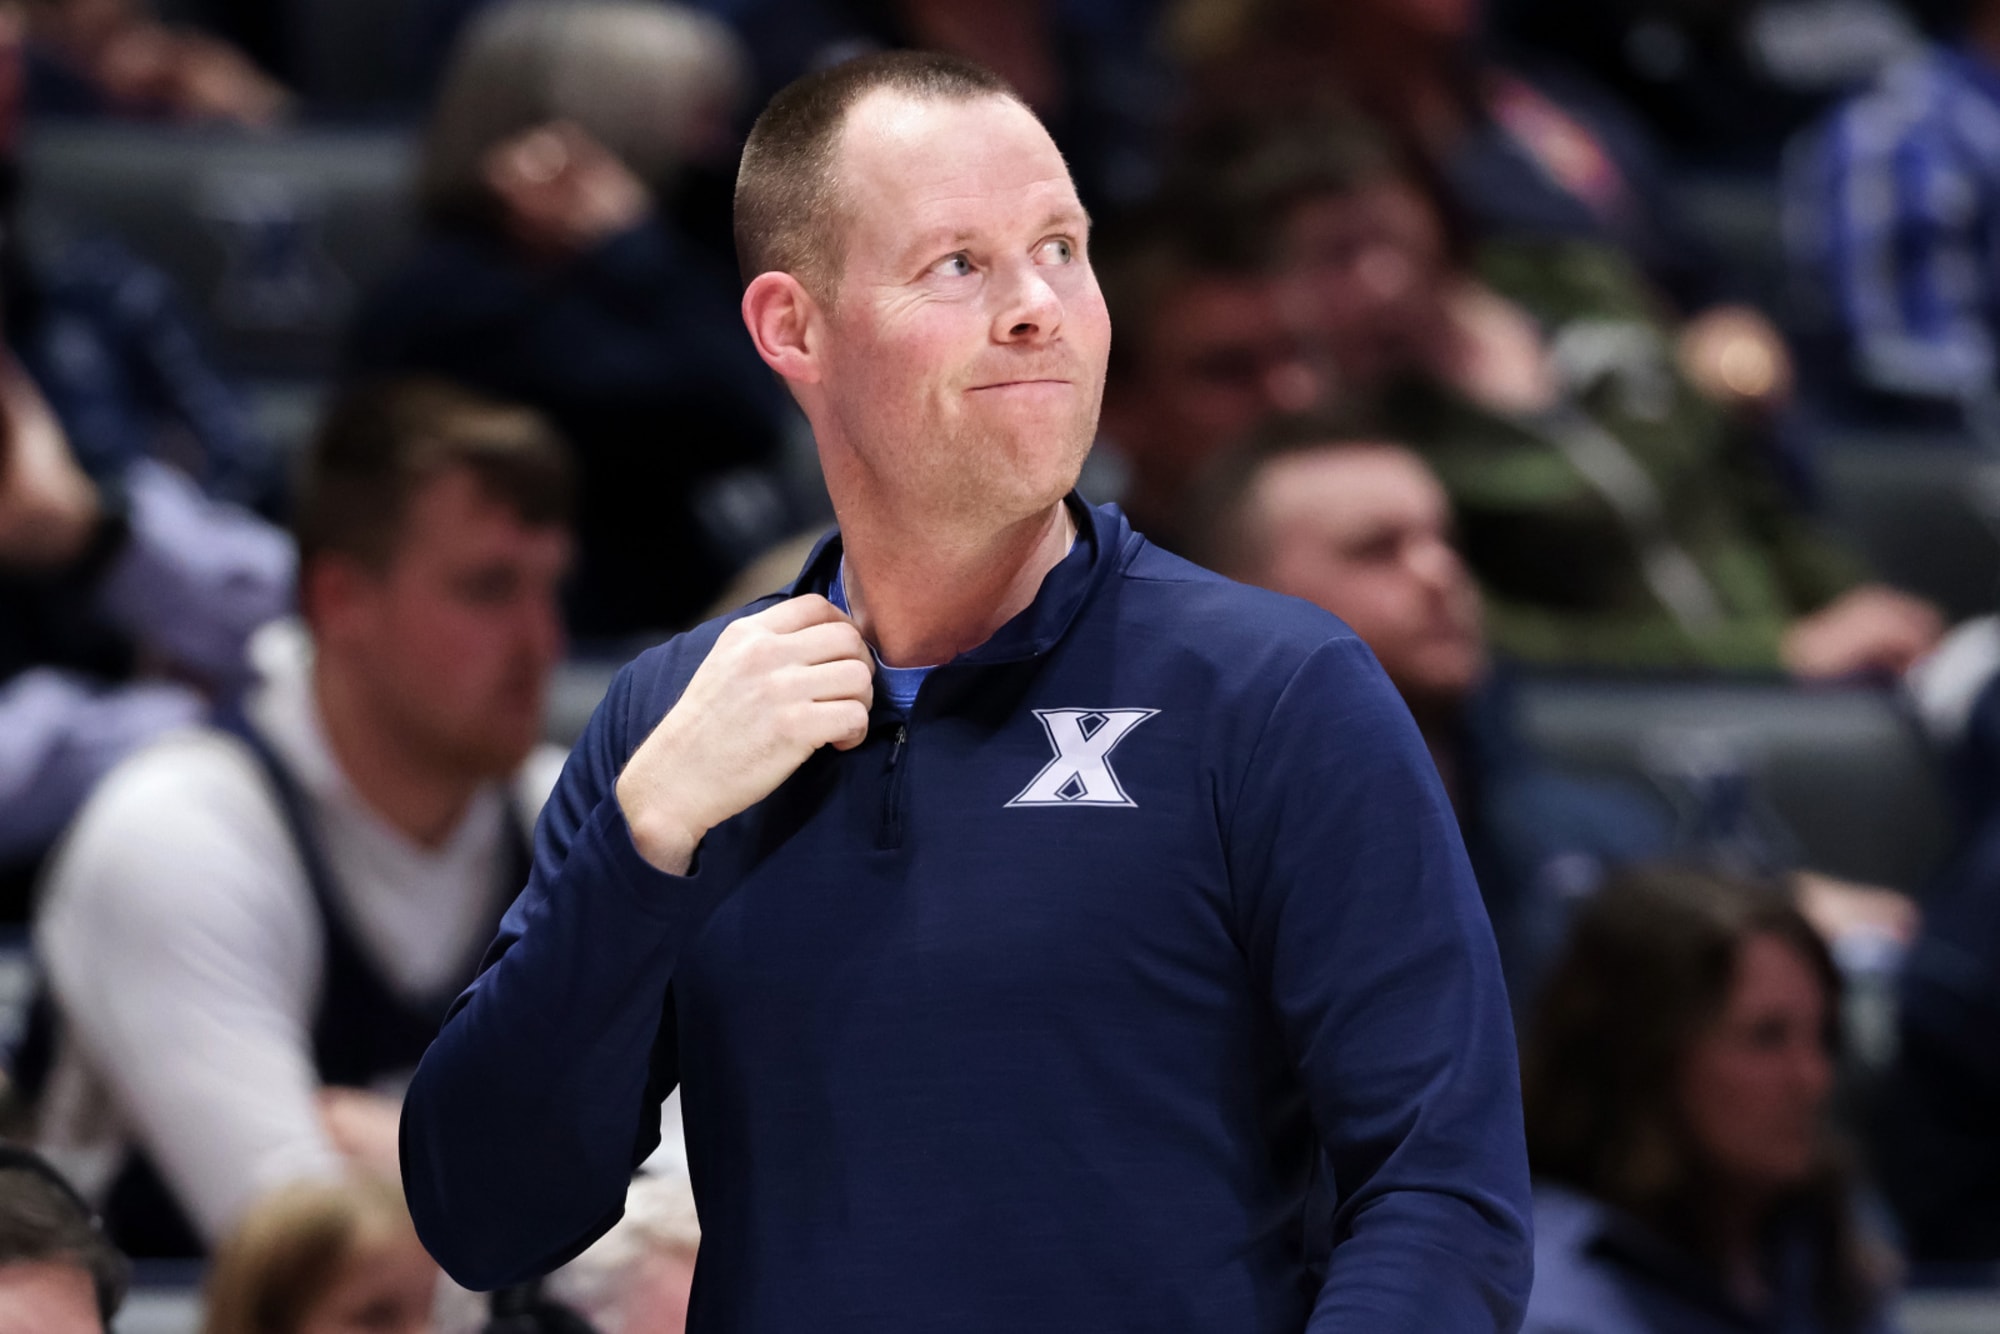 Xavier Basketball: 7 candidates to replace Travis Steele as head coach